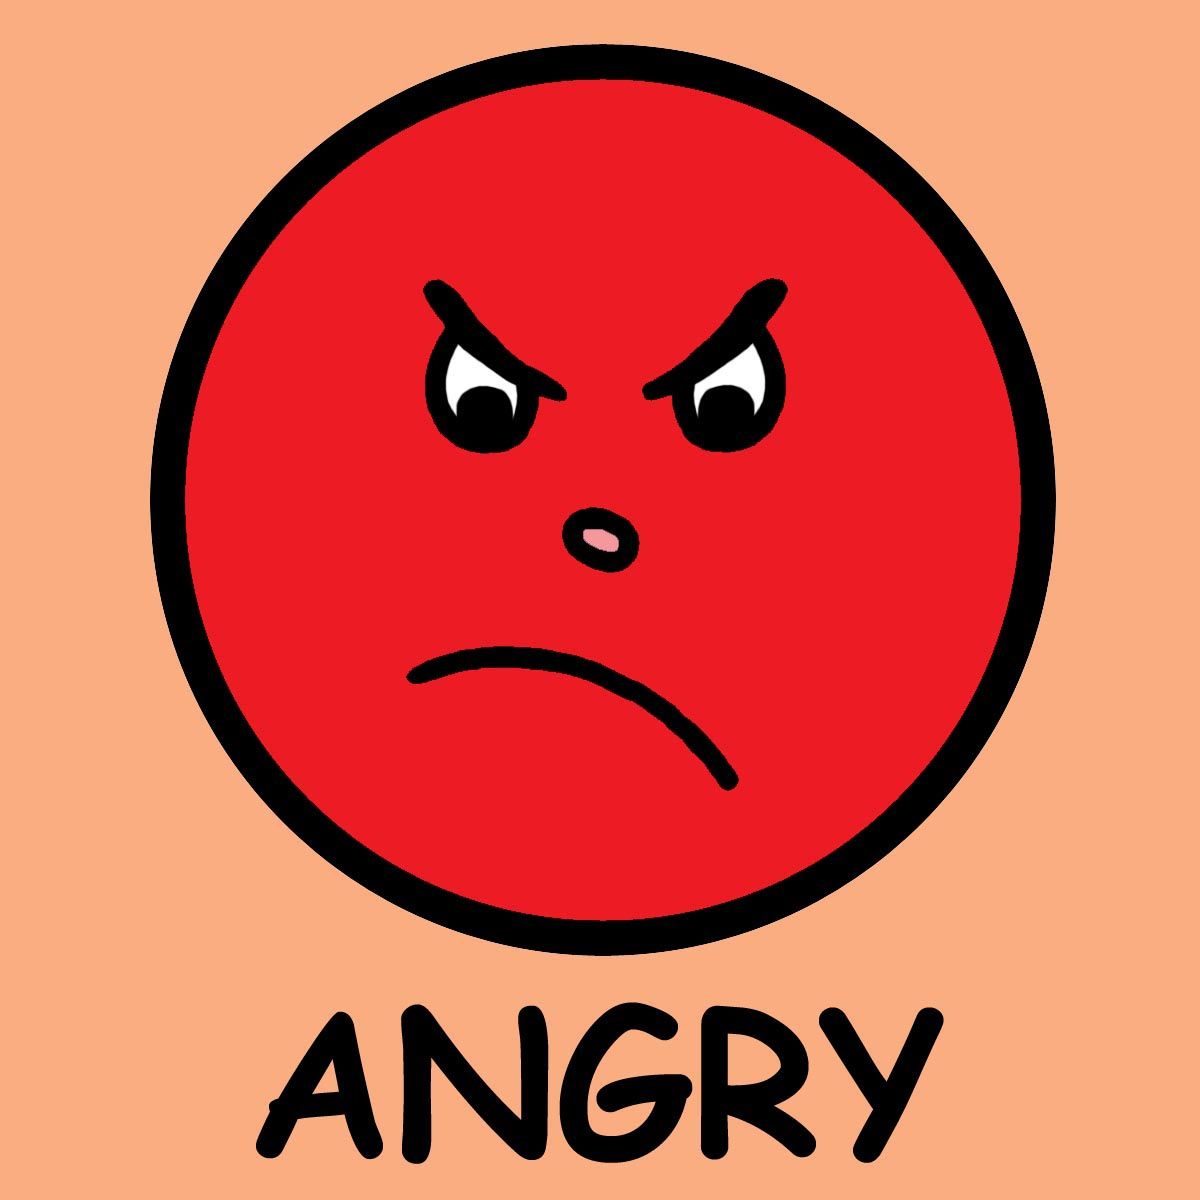 Free Angry Faces Image, Download Free Clip Art, Free Clip Art on Clipart Library